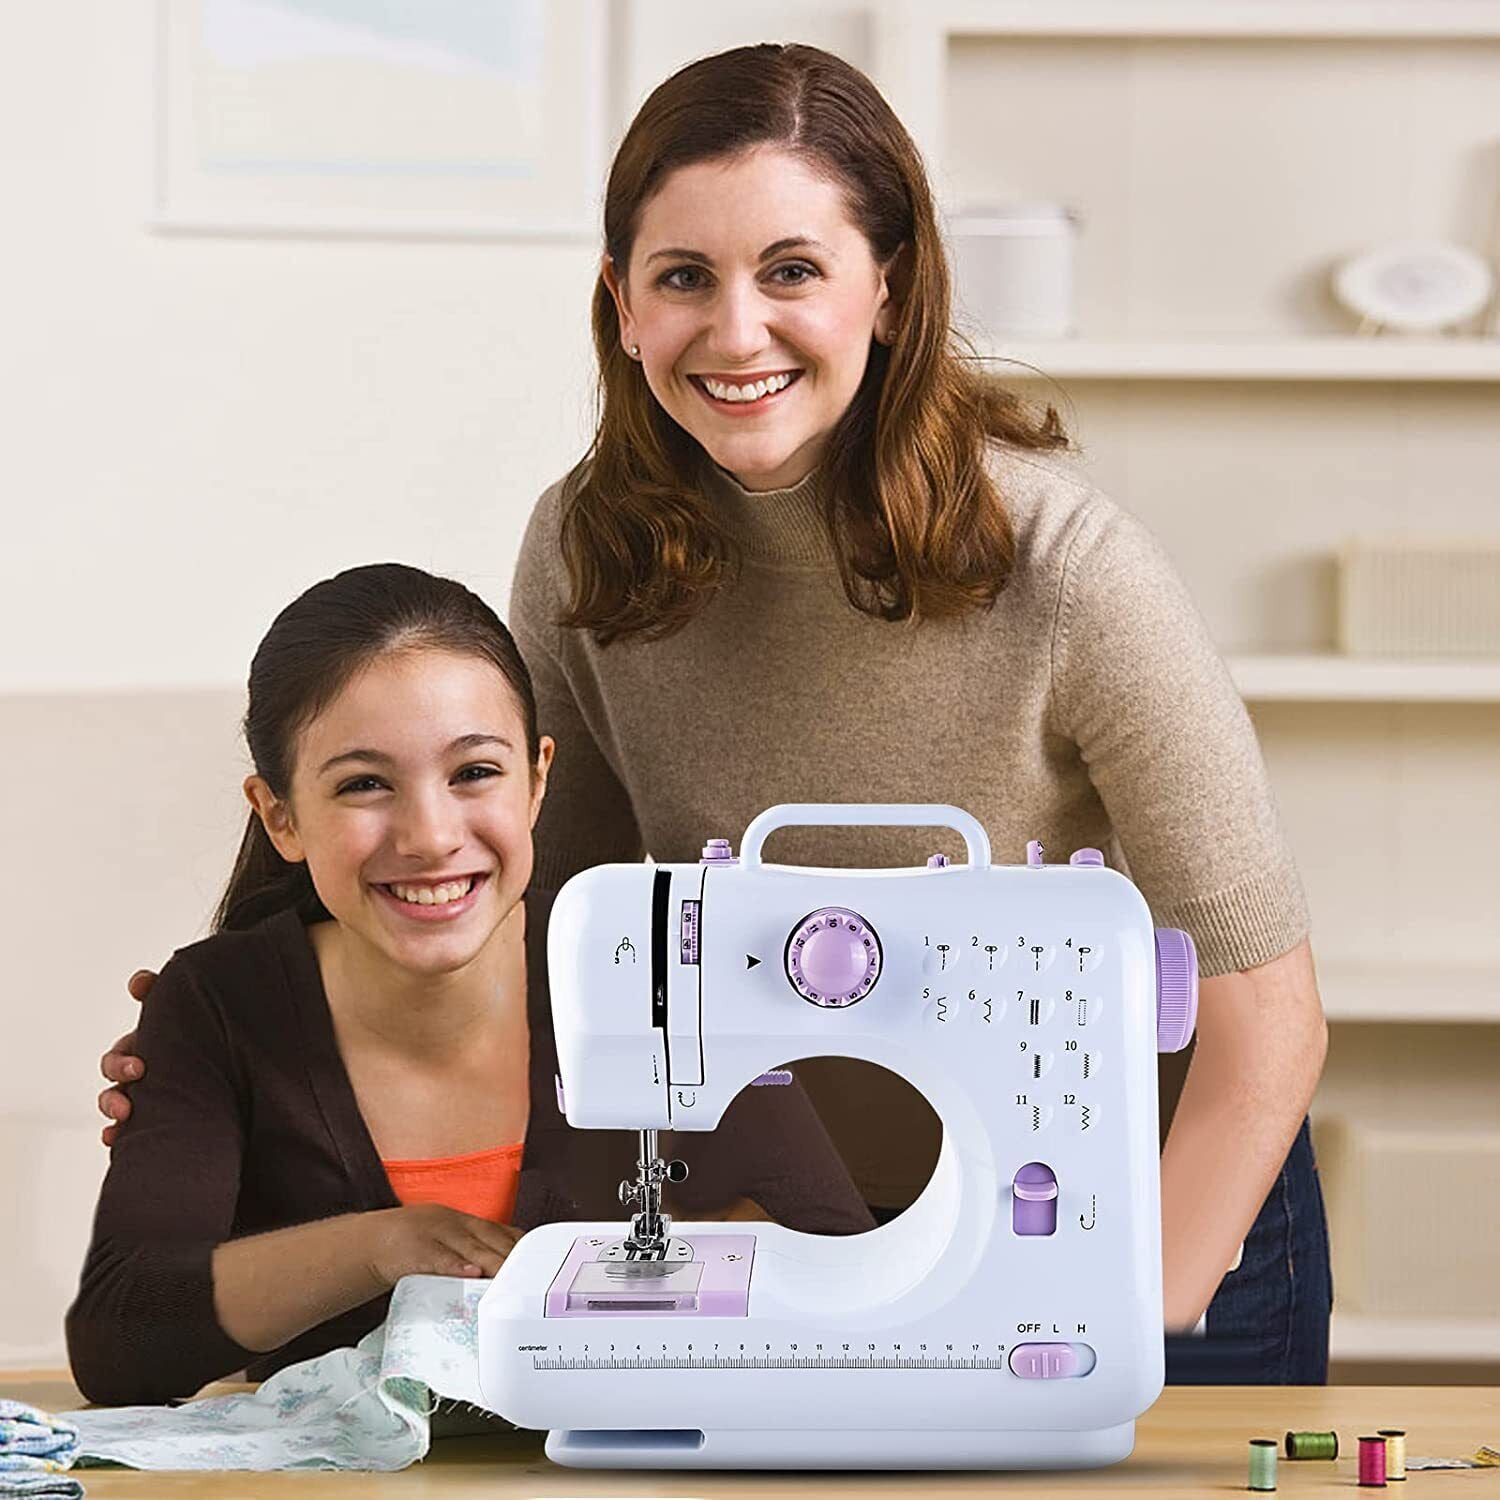 Mini Sewing Machine, Multifunctional Household Sewing Machines for